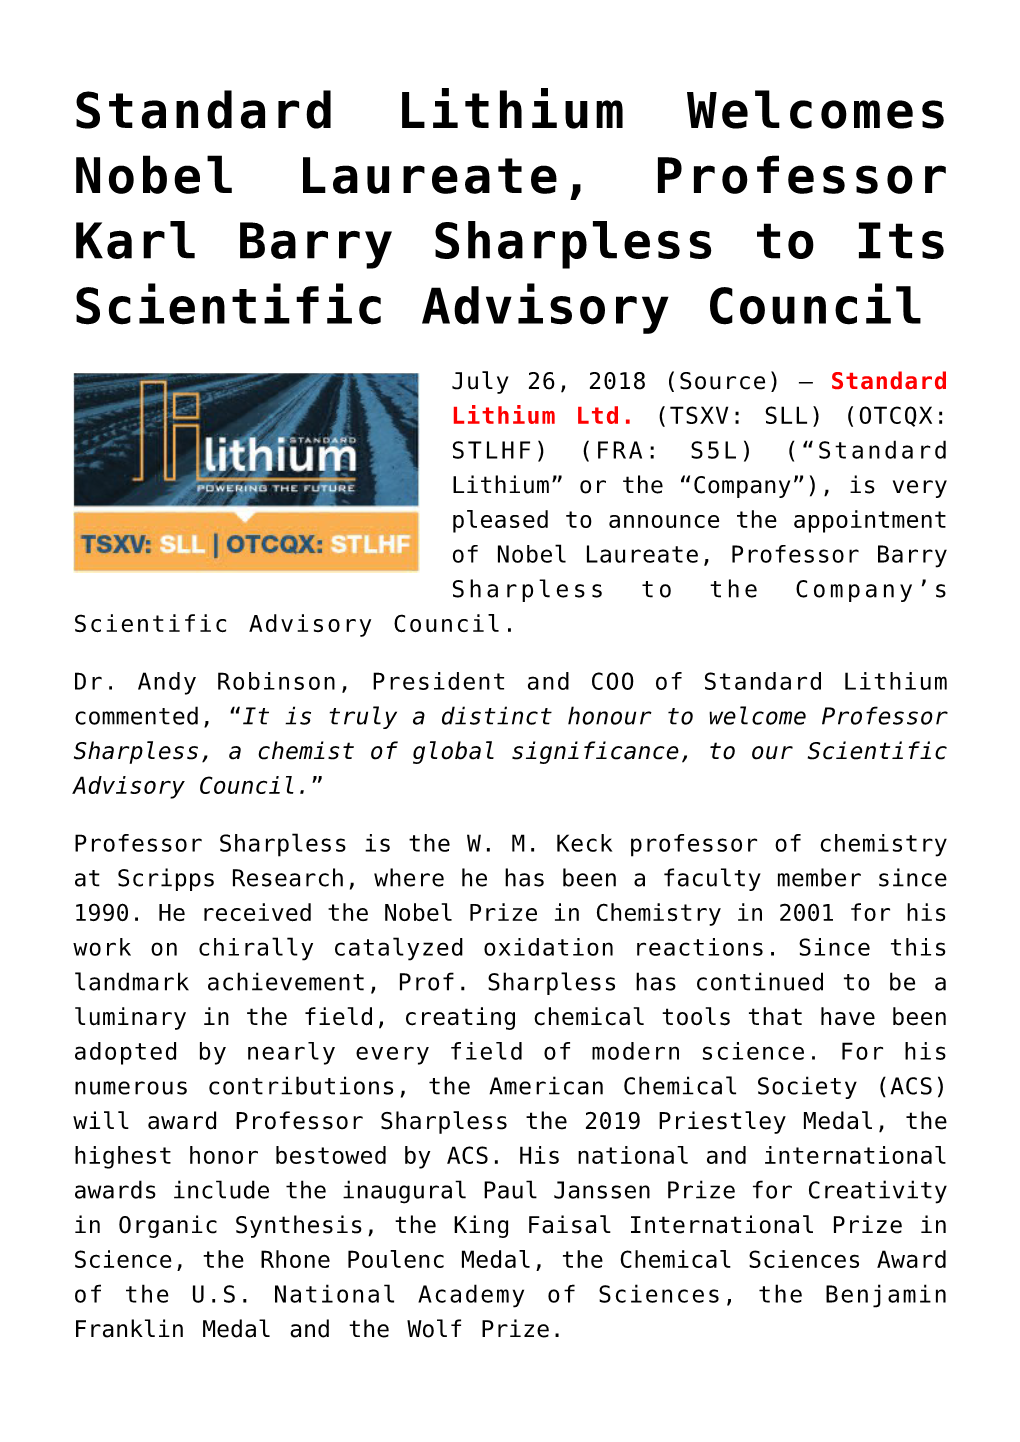 Standard Lithium Welcomes Nobel Laureate, Professor Karl Barry Sharpless to Its Scientific Advisory Council